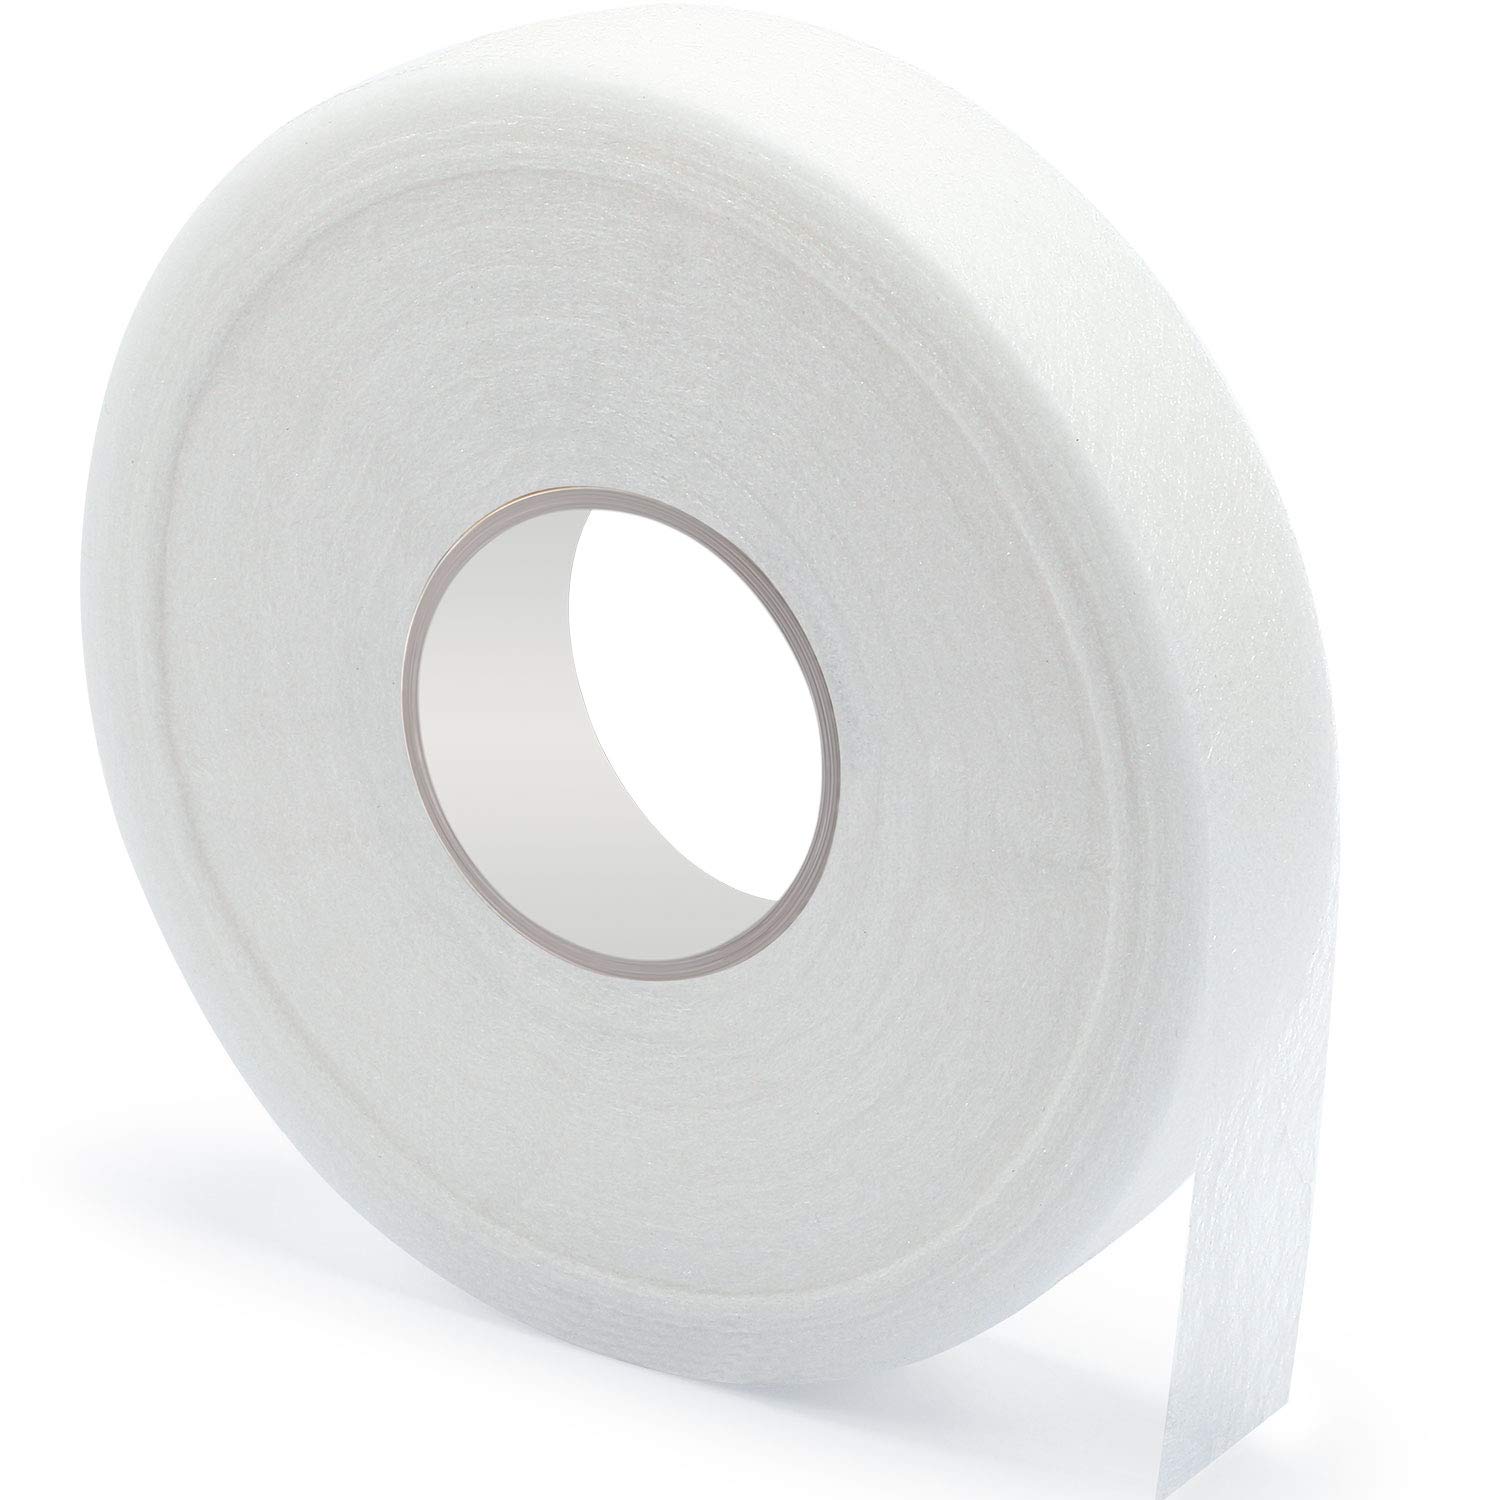 Iron-on Hemming Tape Fabric Fusing Tape Fusible Bonding Web Adhesive Tape for Bonding Clothes Jeans Pants Collars, 100 Yards (1/2 Inches)